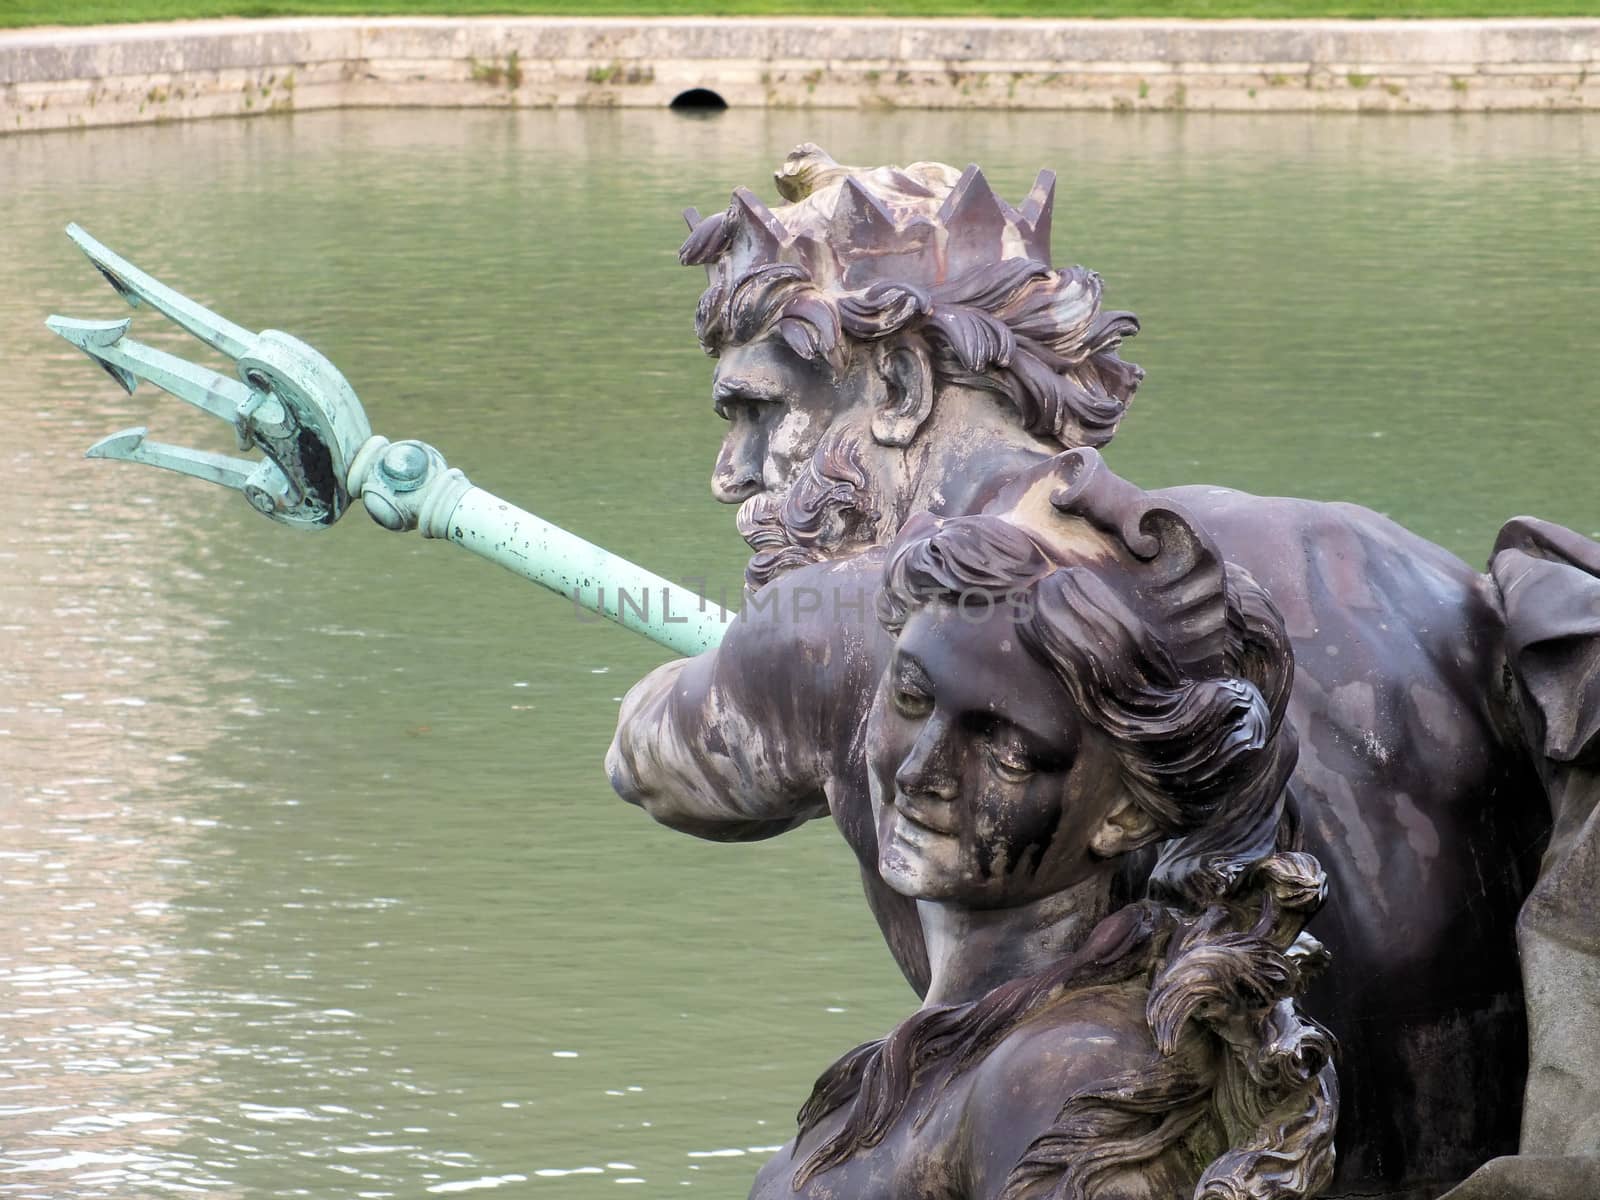 The sculpture of Neptune is the centrepiece of Neptune's Fountain at the Palace of Versailles